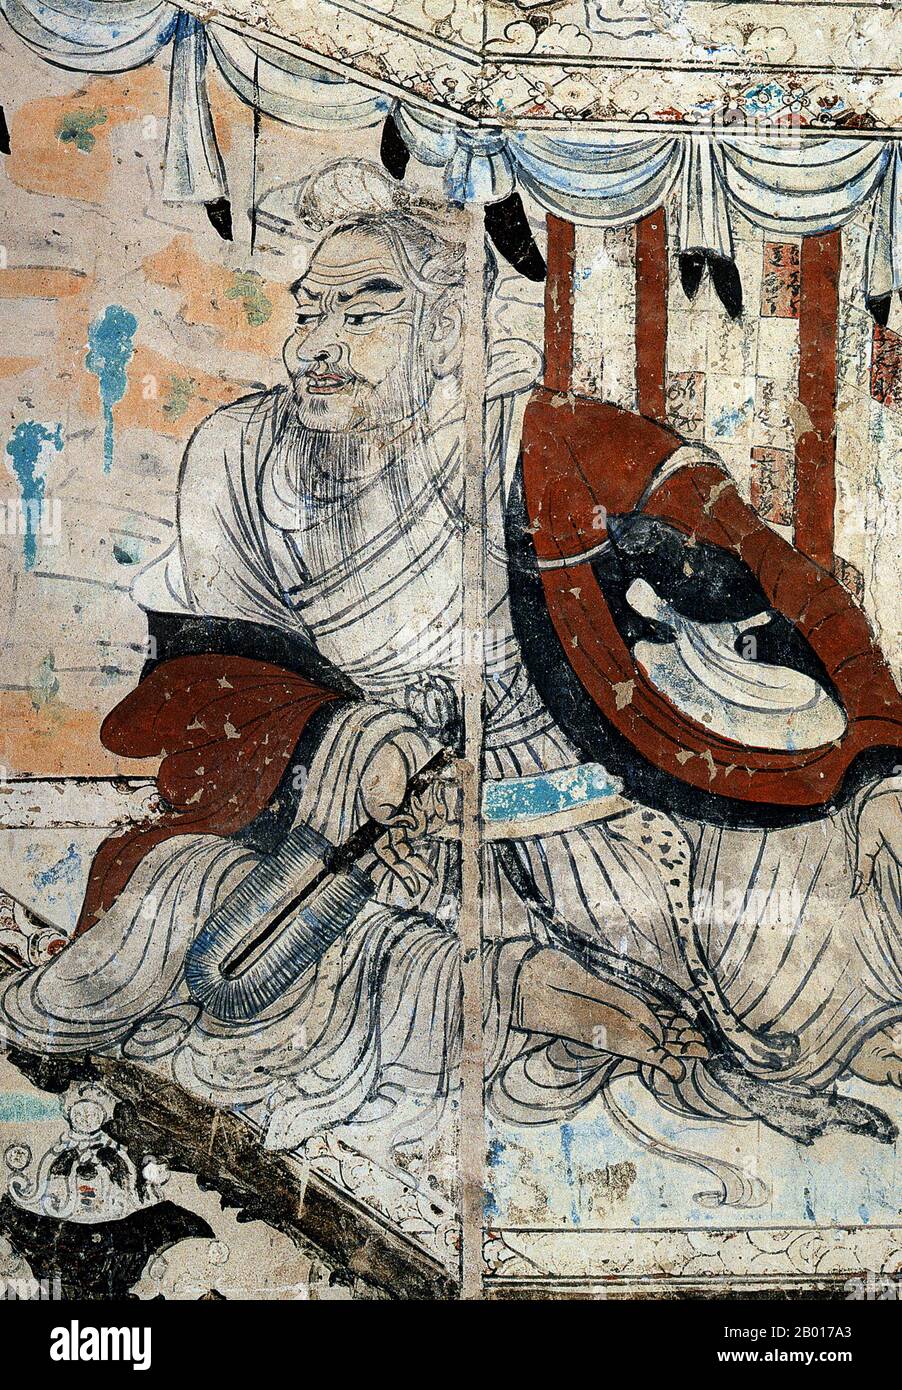 China: Vimalakirti in debate with the bodhisattva Manjusri. Detail from a wall painting in Mogao Cave 103, Dunhuang, 8th century.  The Vimalakīrti Sūtra is a Mahāyāna Buddhist sūtra. Among other subjects, the sutra teaches the meaning of nonduality. An important aspect of this scripture is that it contains a report of a teaching addressed to both arhats and bodhisattvas by the layman Vimalakīrti, who expounds the doctrine of Śūnyatā, or emptiness, to them. This culminates with the wordless teaching of silence. Stock Photo